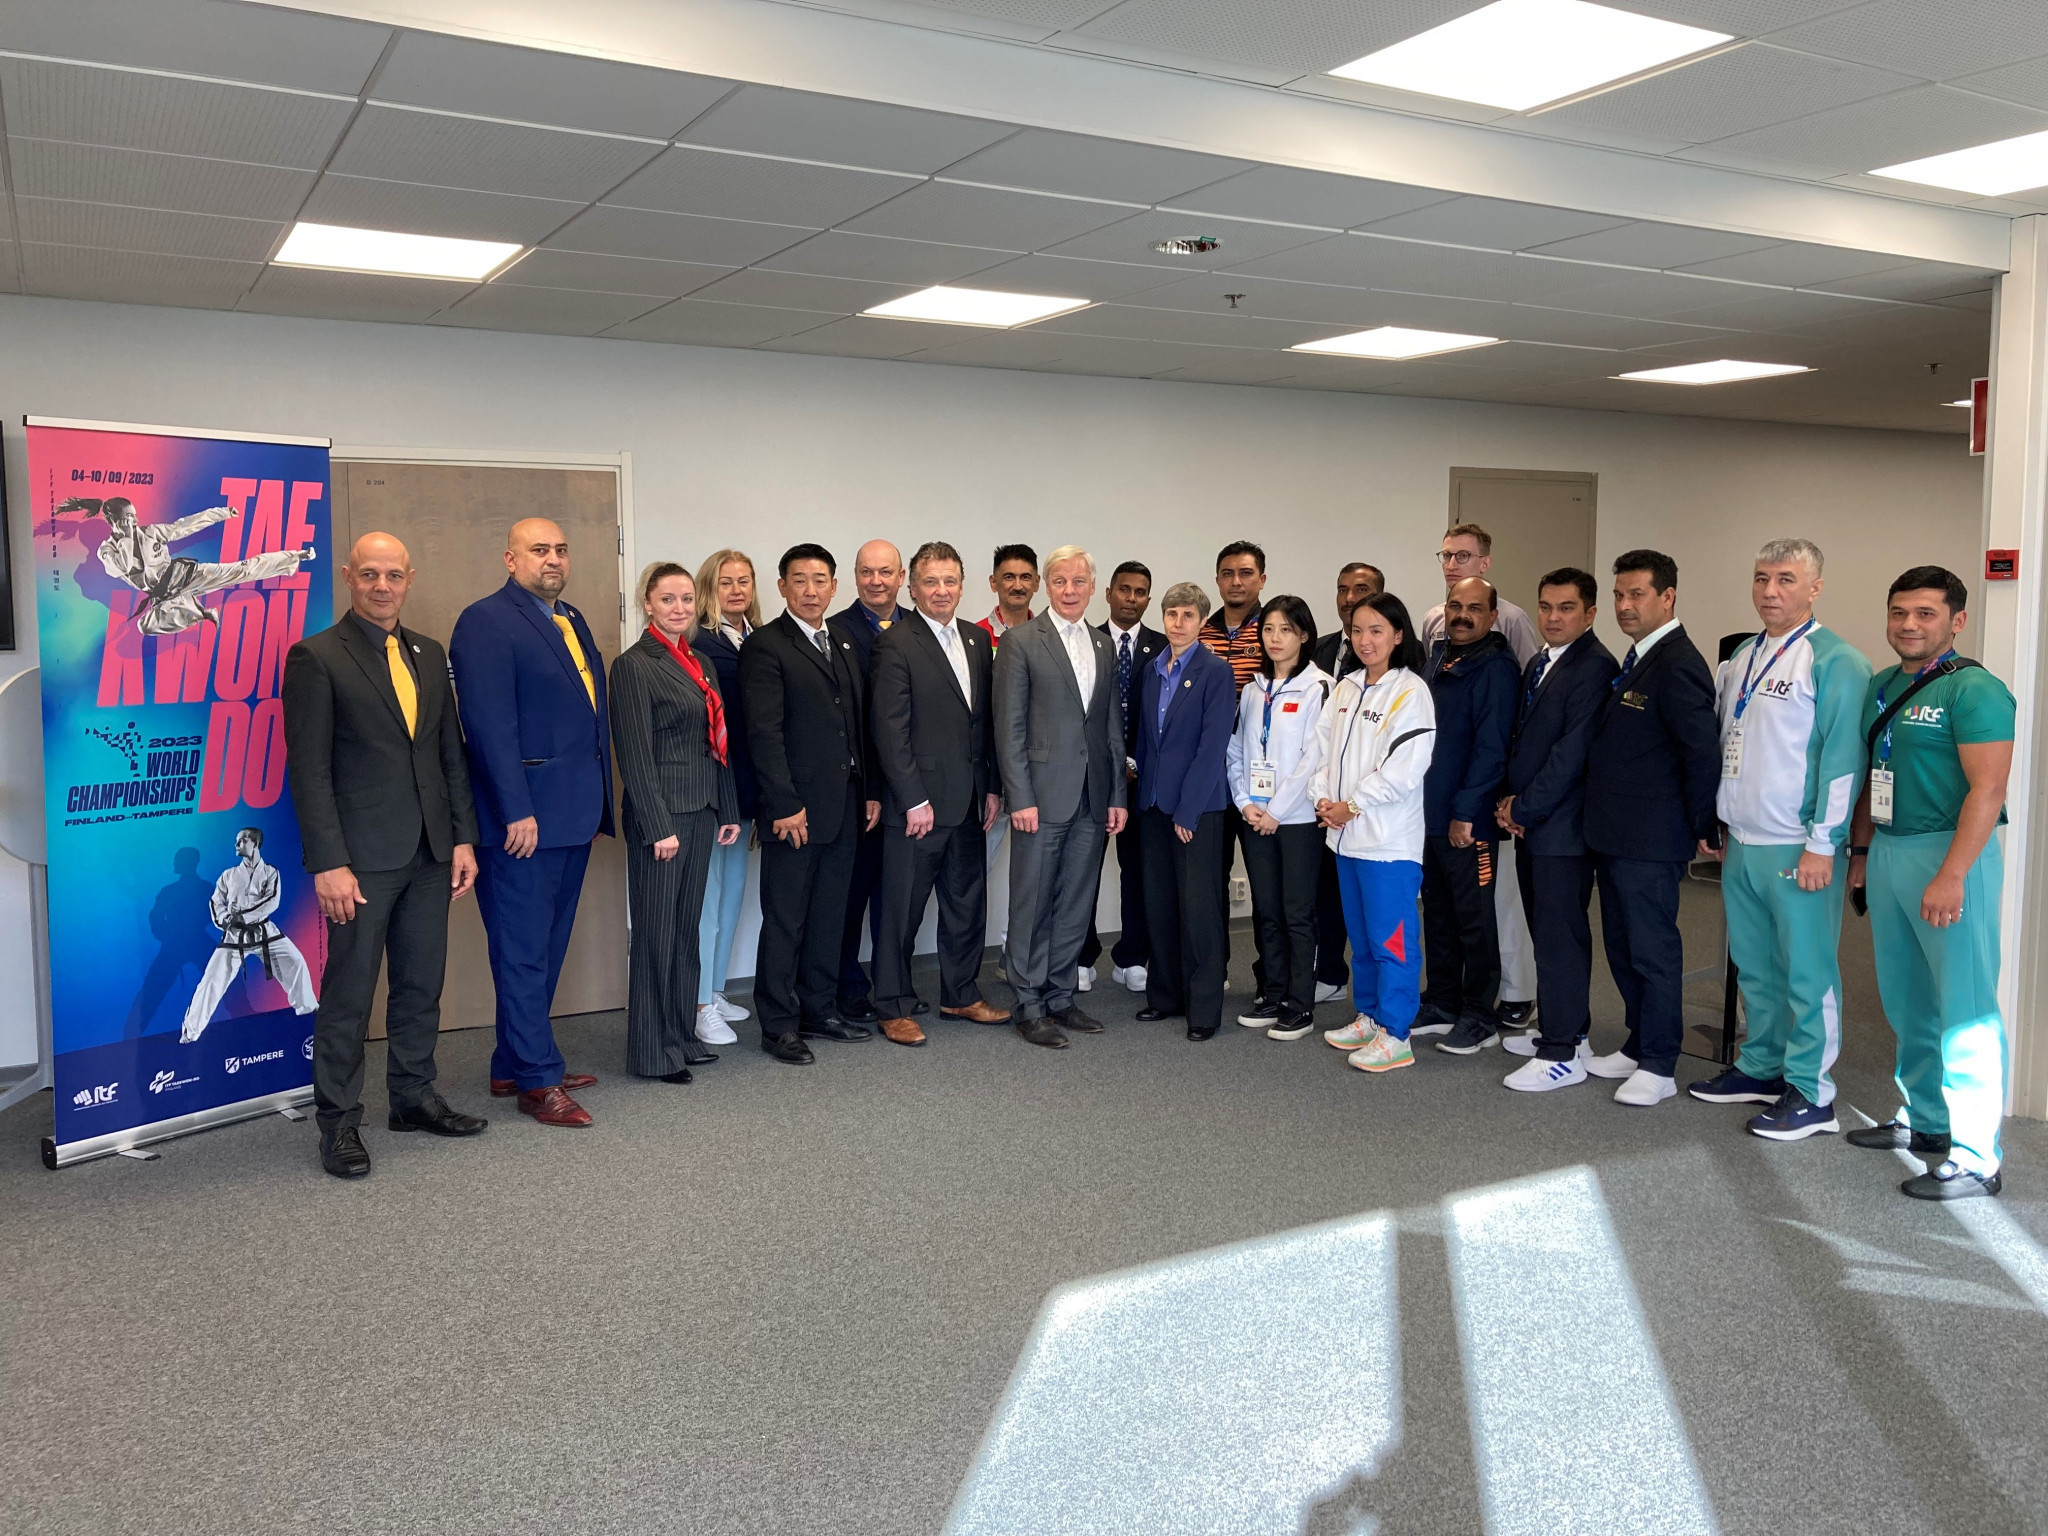 ITF meets Asian leaders to discuss "main goal" of developing taekwon-do on continent